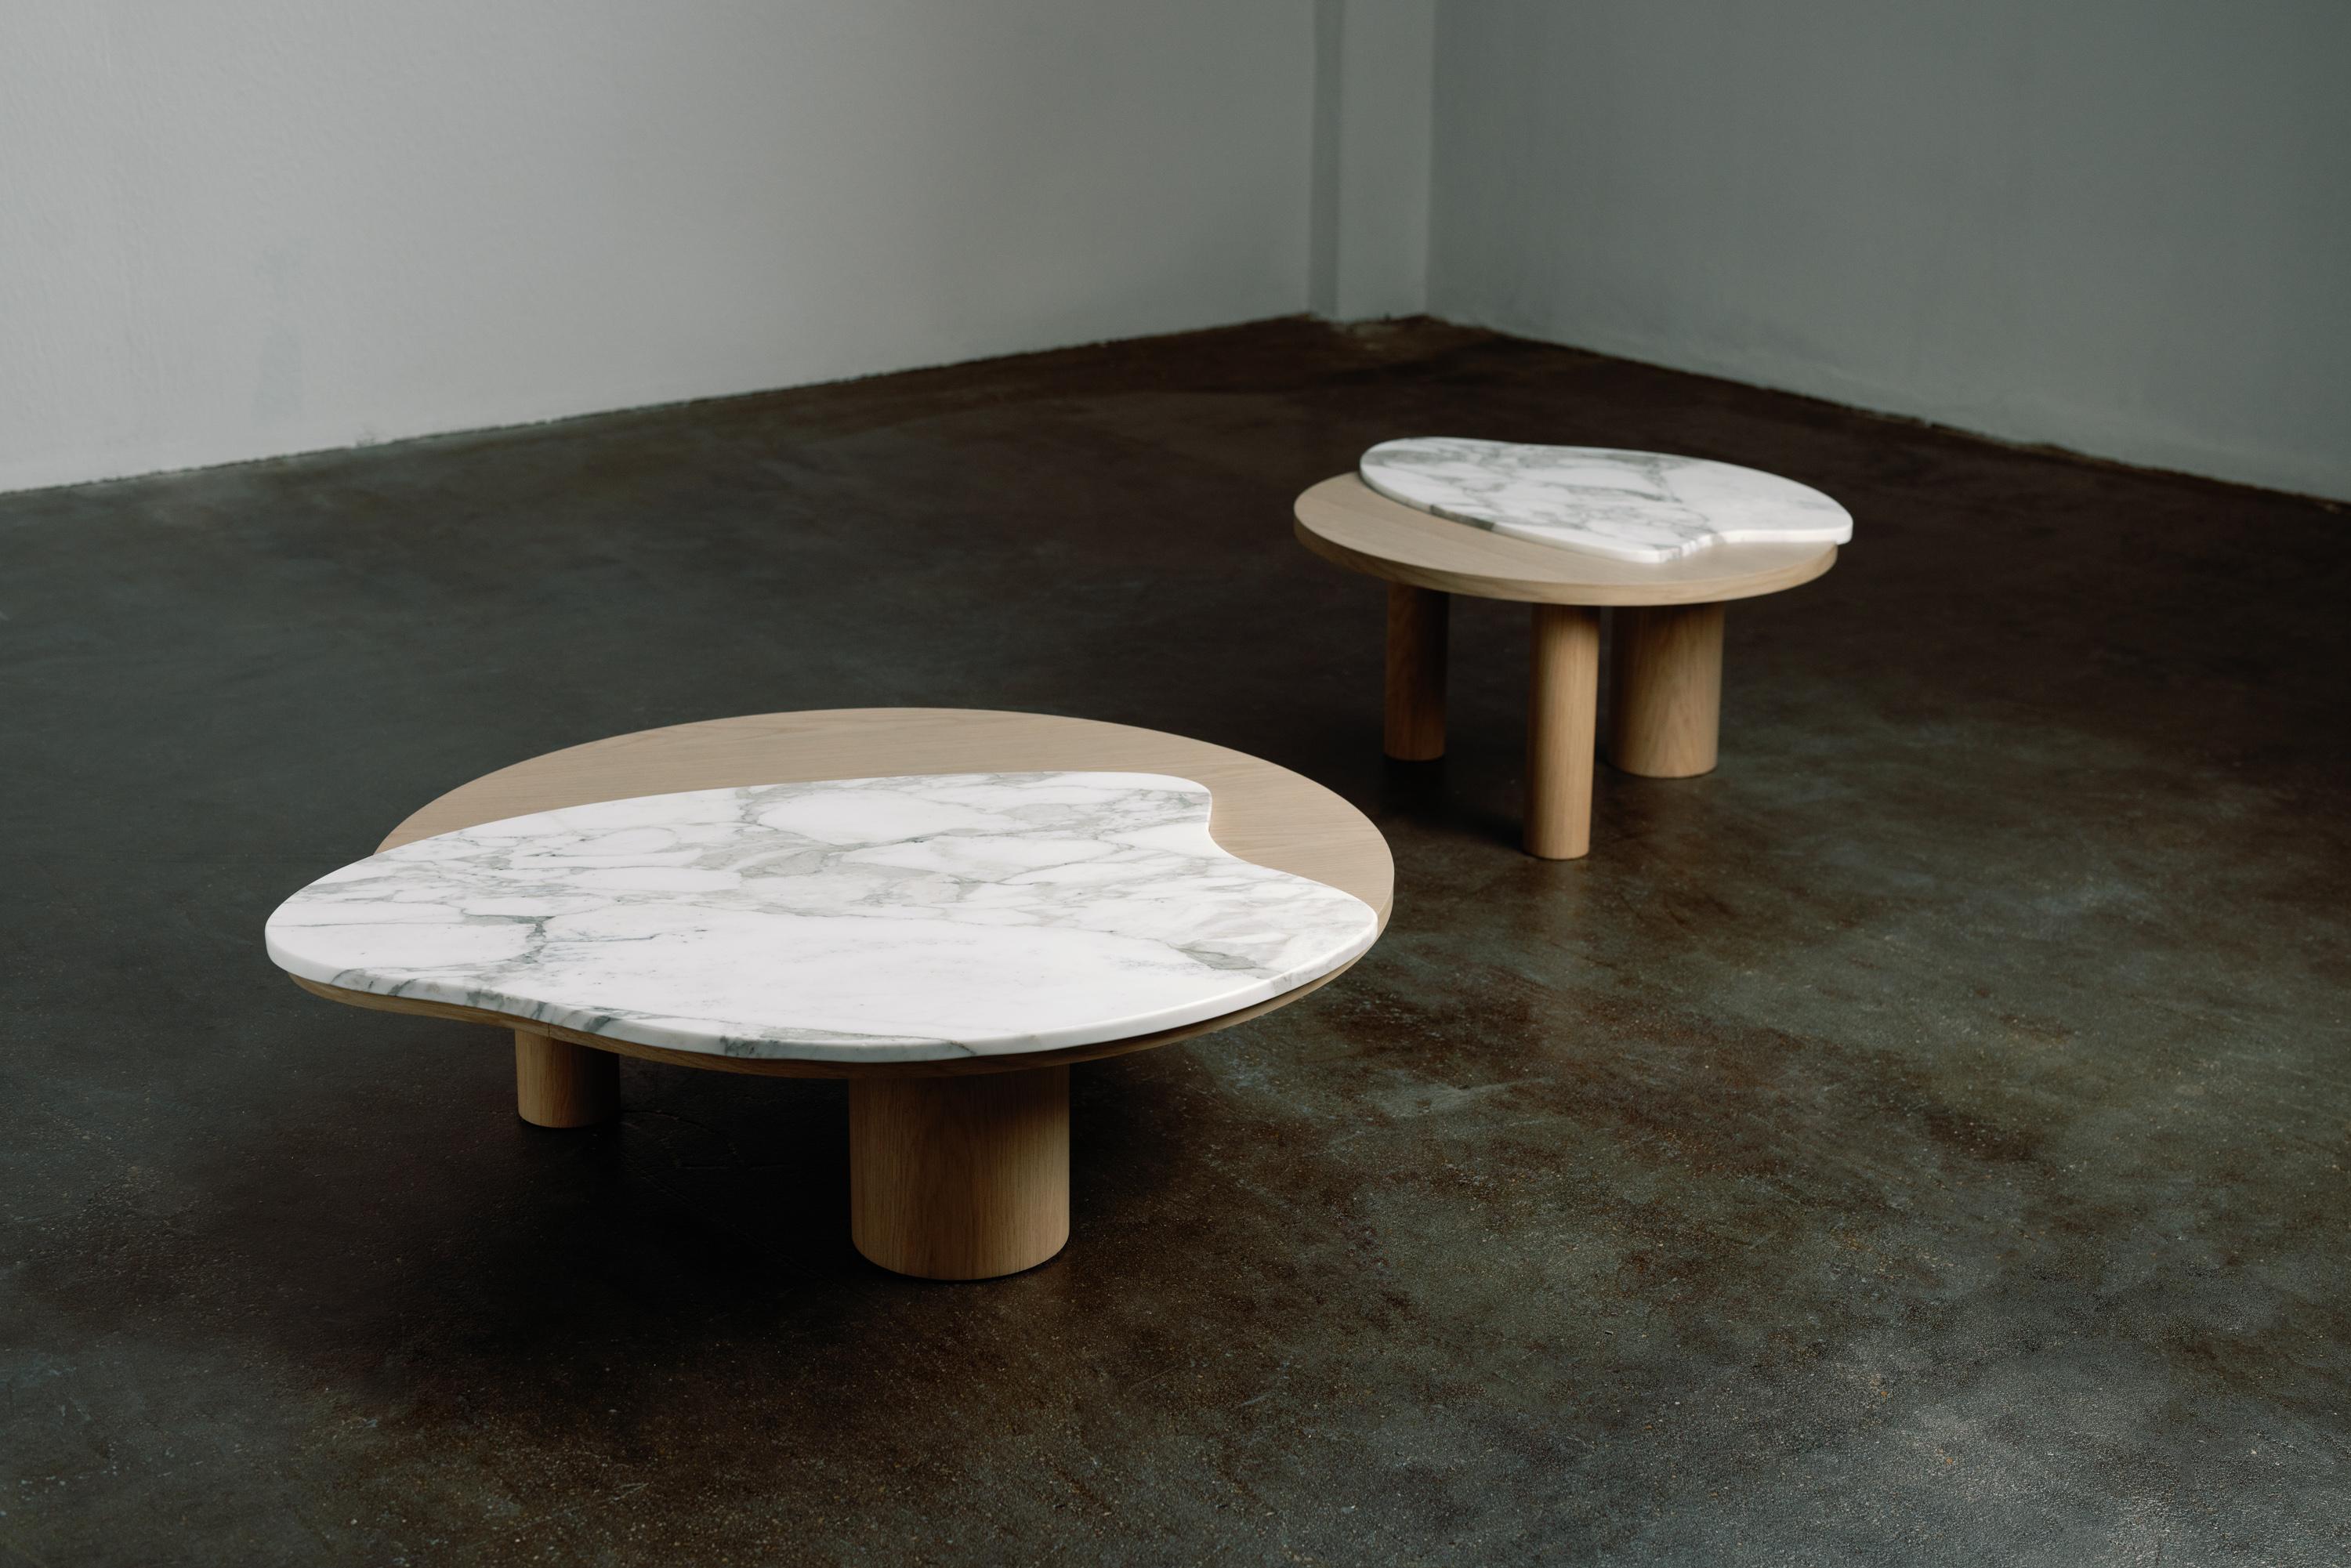 Bordeira Nesting Coffee Tables, Contemporary Collection, handcrafted in Portugal - Europe by Greenapple.

Designed by Rute Martins for the Contemporary Collection, the Bordeira nesting coffee table was designed to add the essence of nature into the